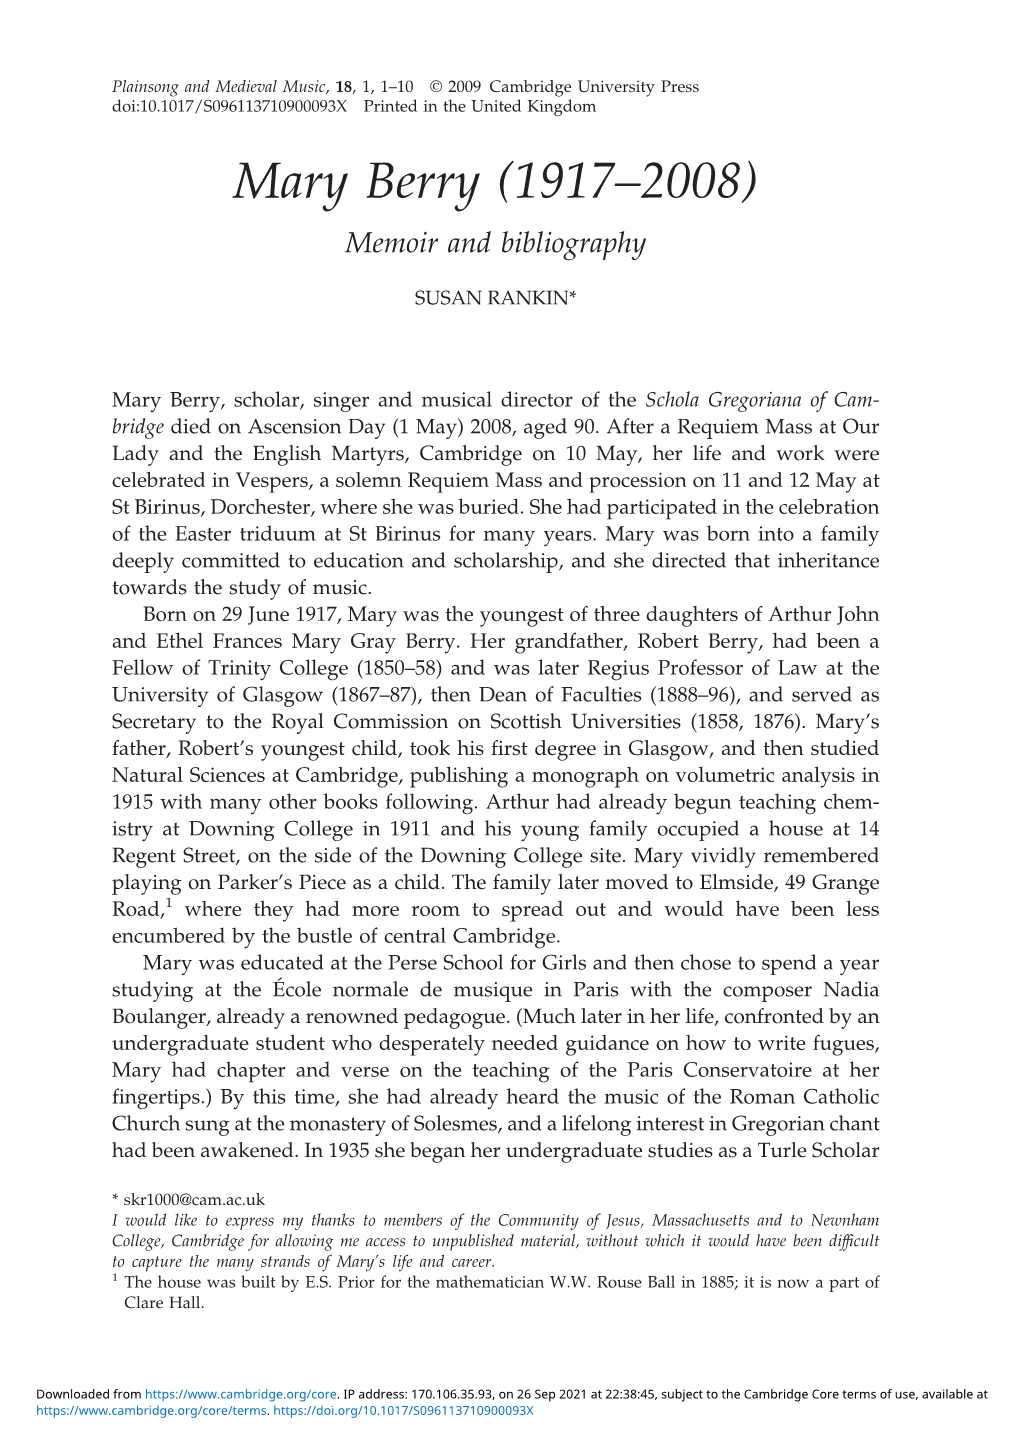 Mary Berry (1917–2008) Memoir and Bibliography